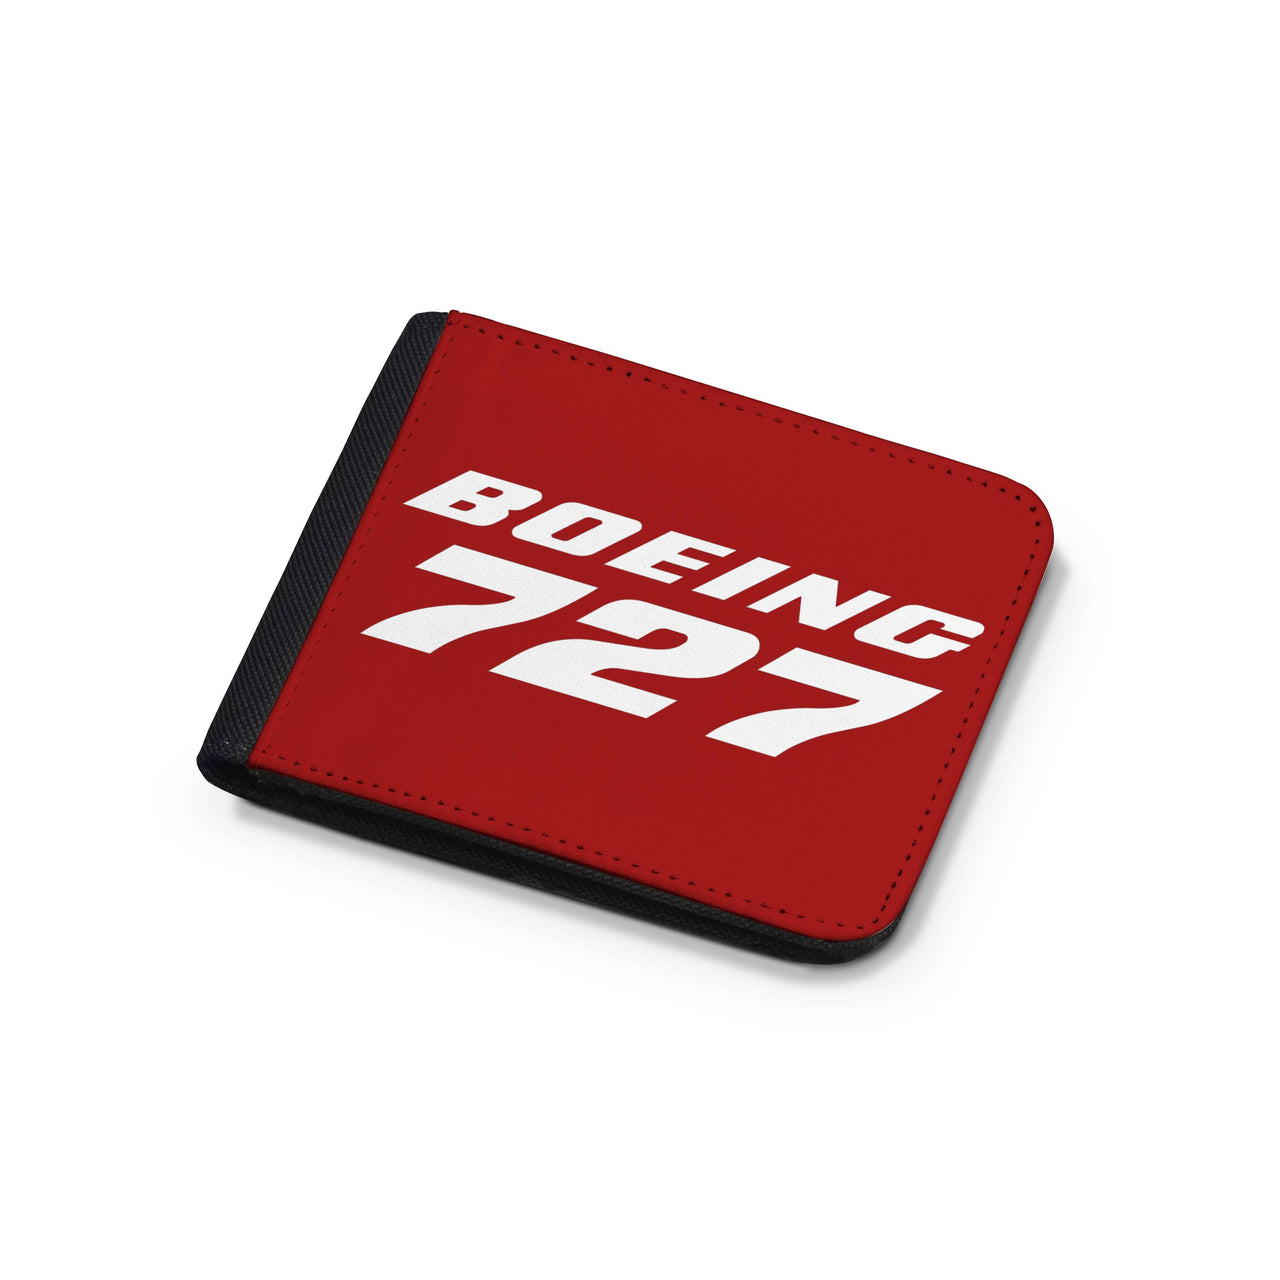 Boeing 727 & Text Designed Wallets